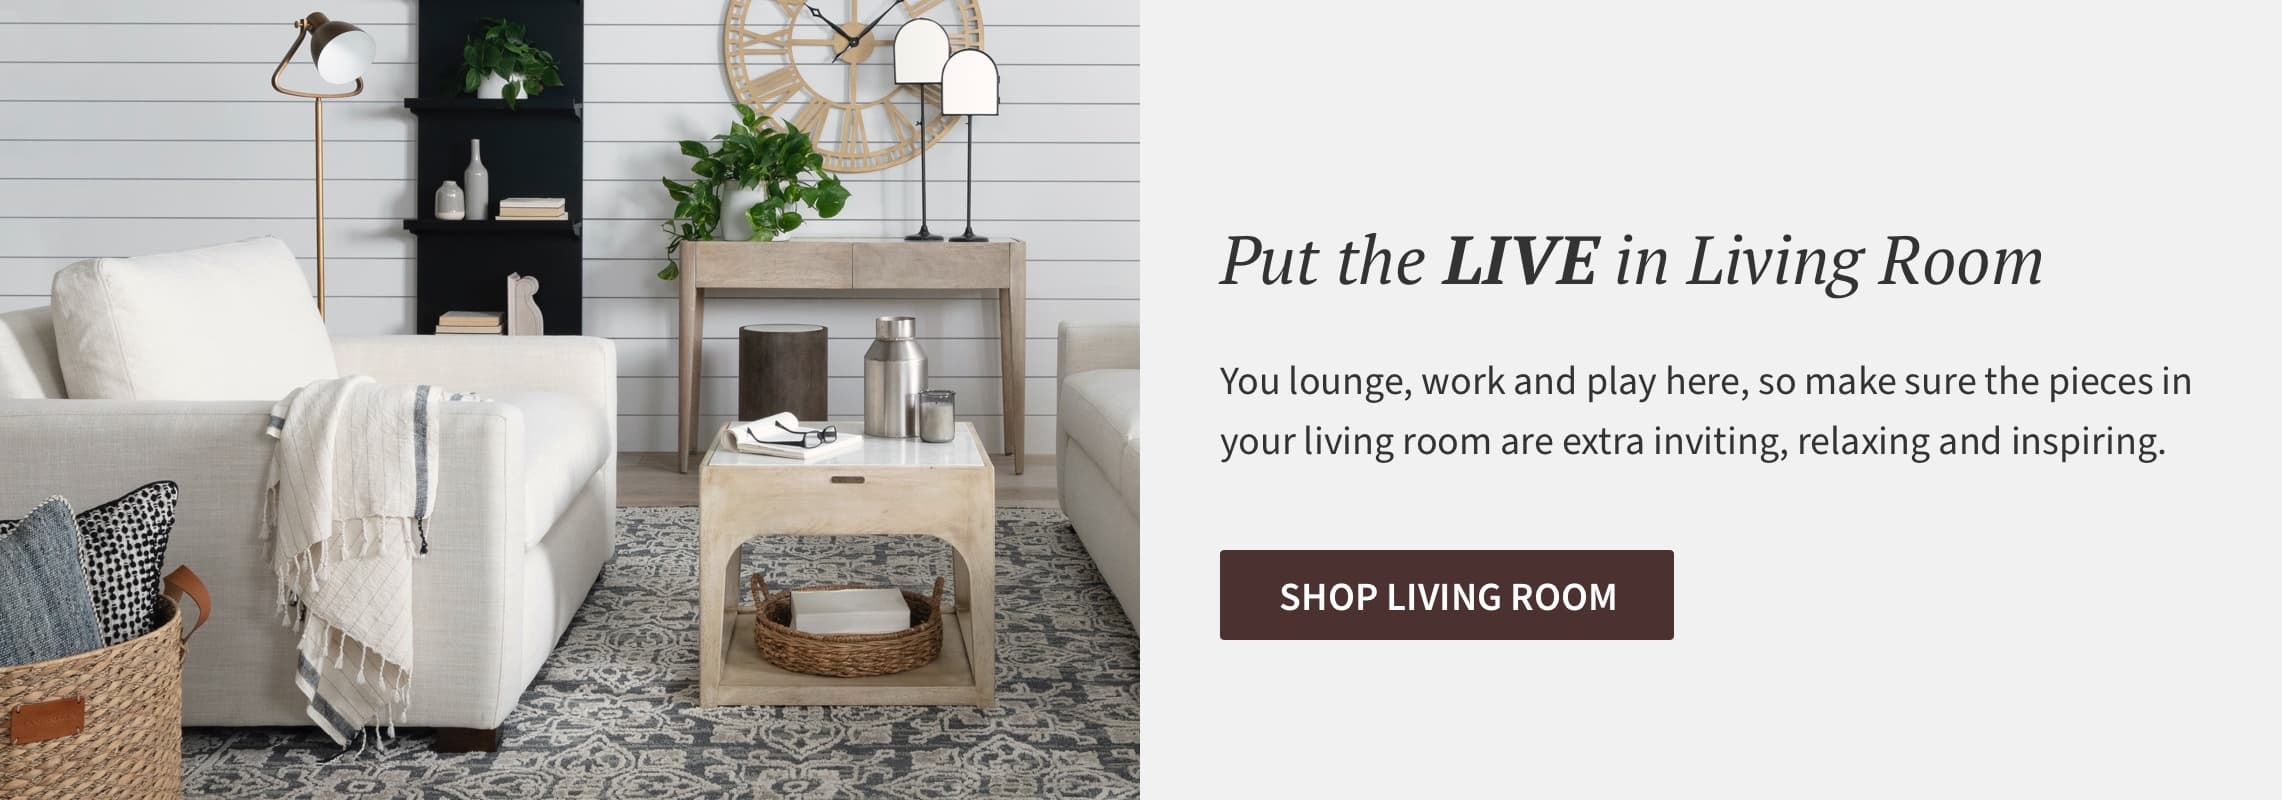 PUT THE LIVE IN LIVING ROOM